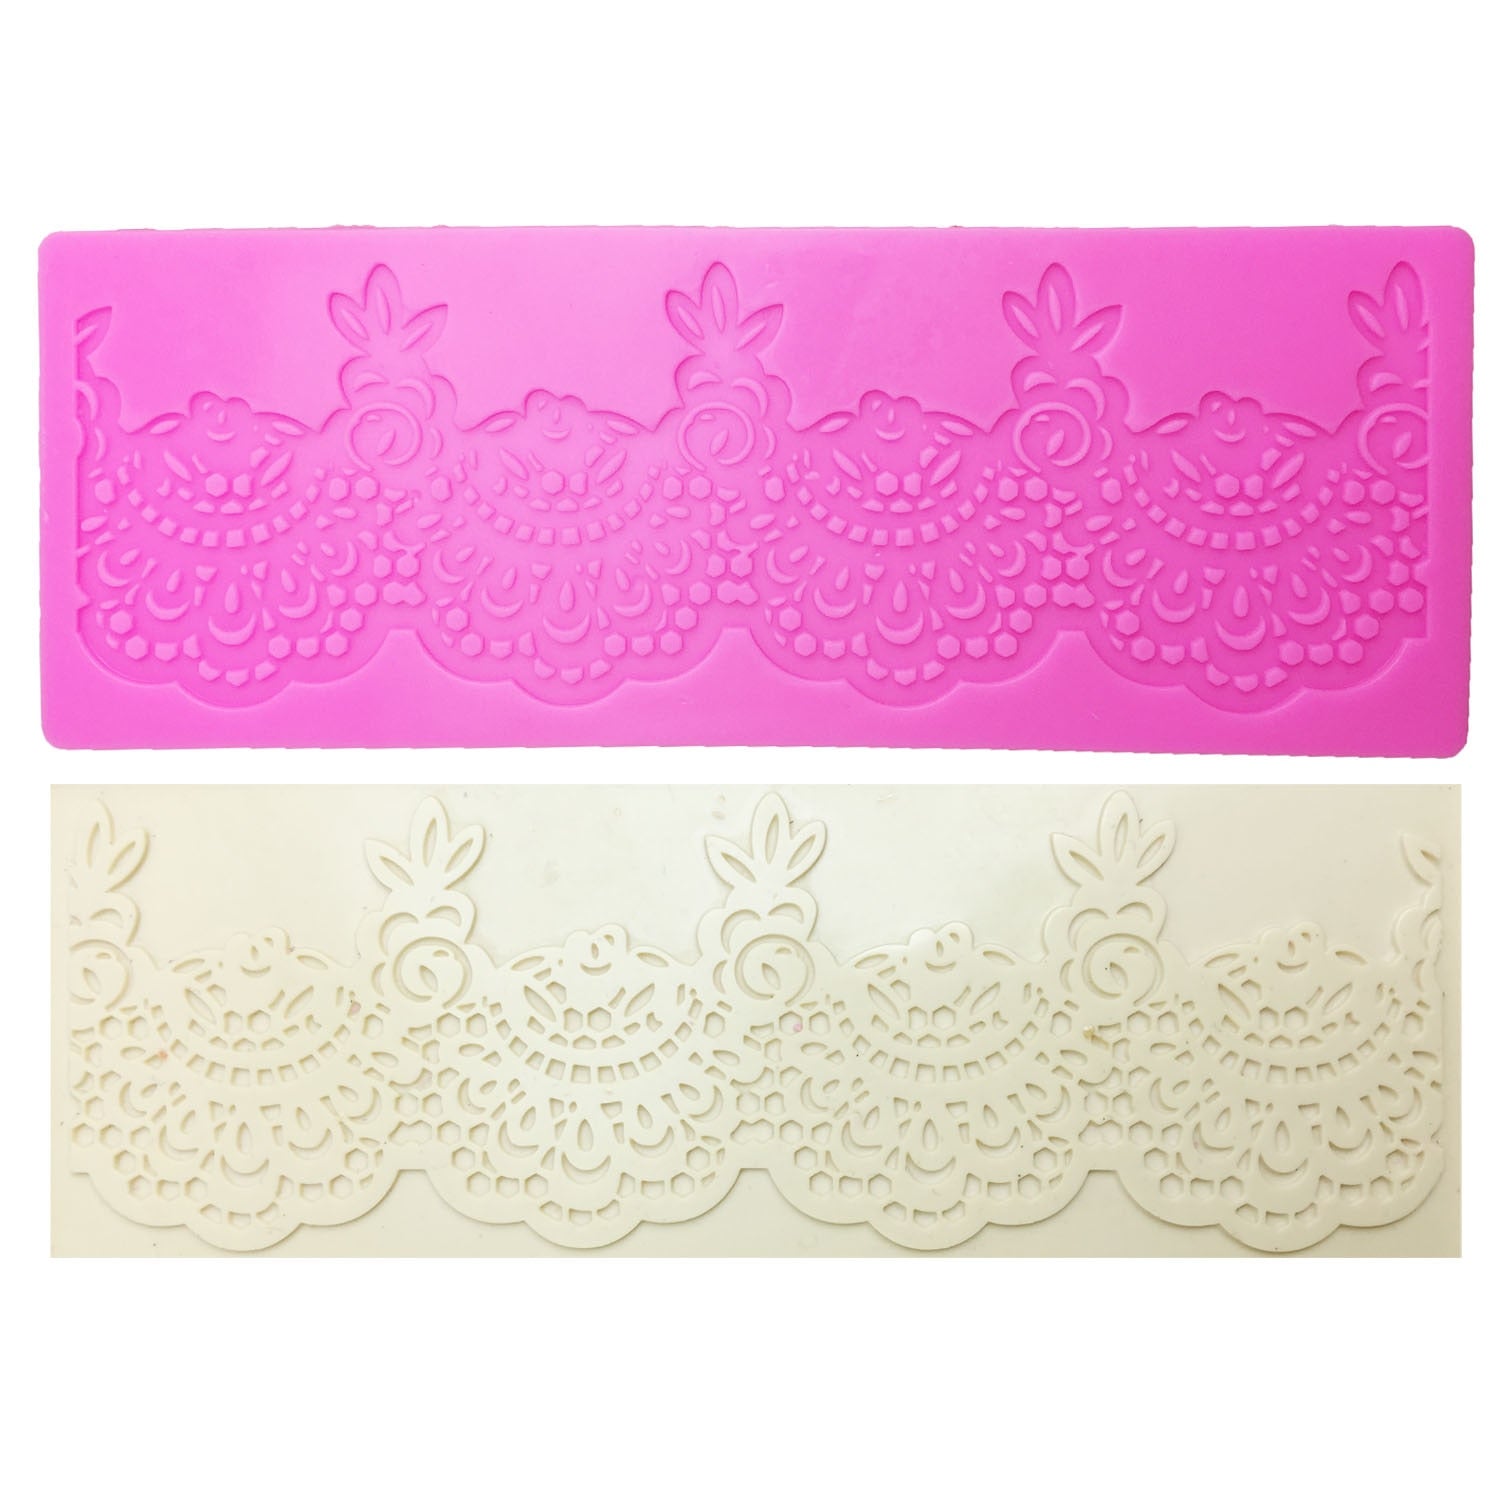 M0358 Flower lace mat DIY Silicone Mold For Cake Decorating tools baking bakeware mould silicone mat fondant cake